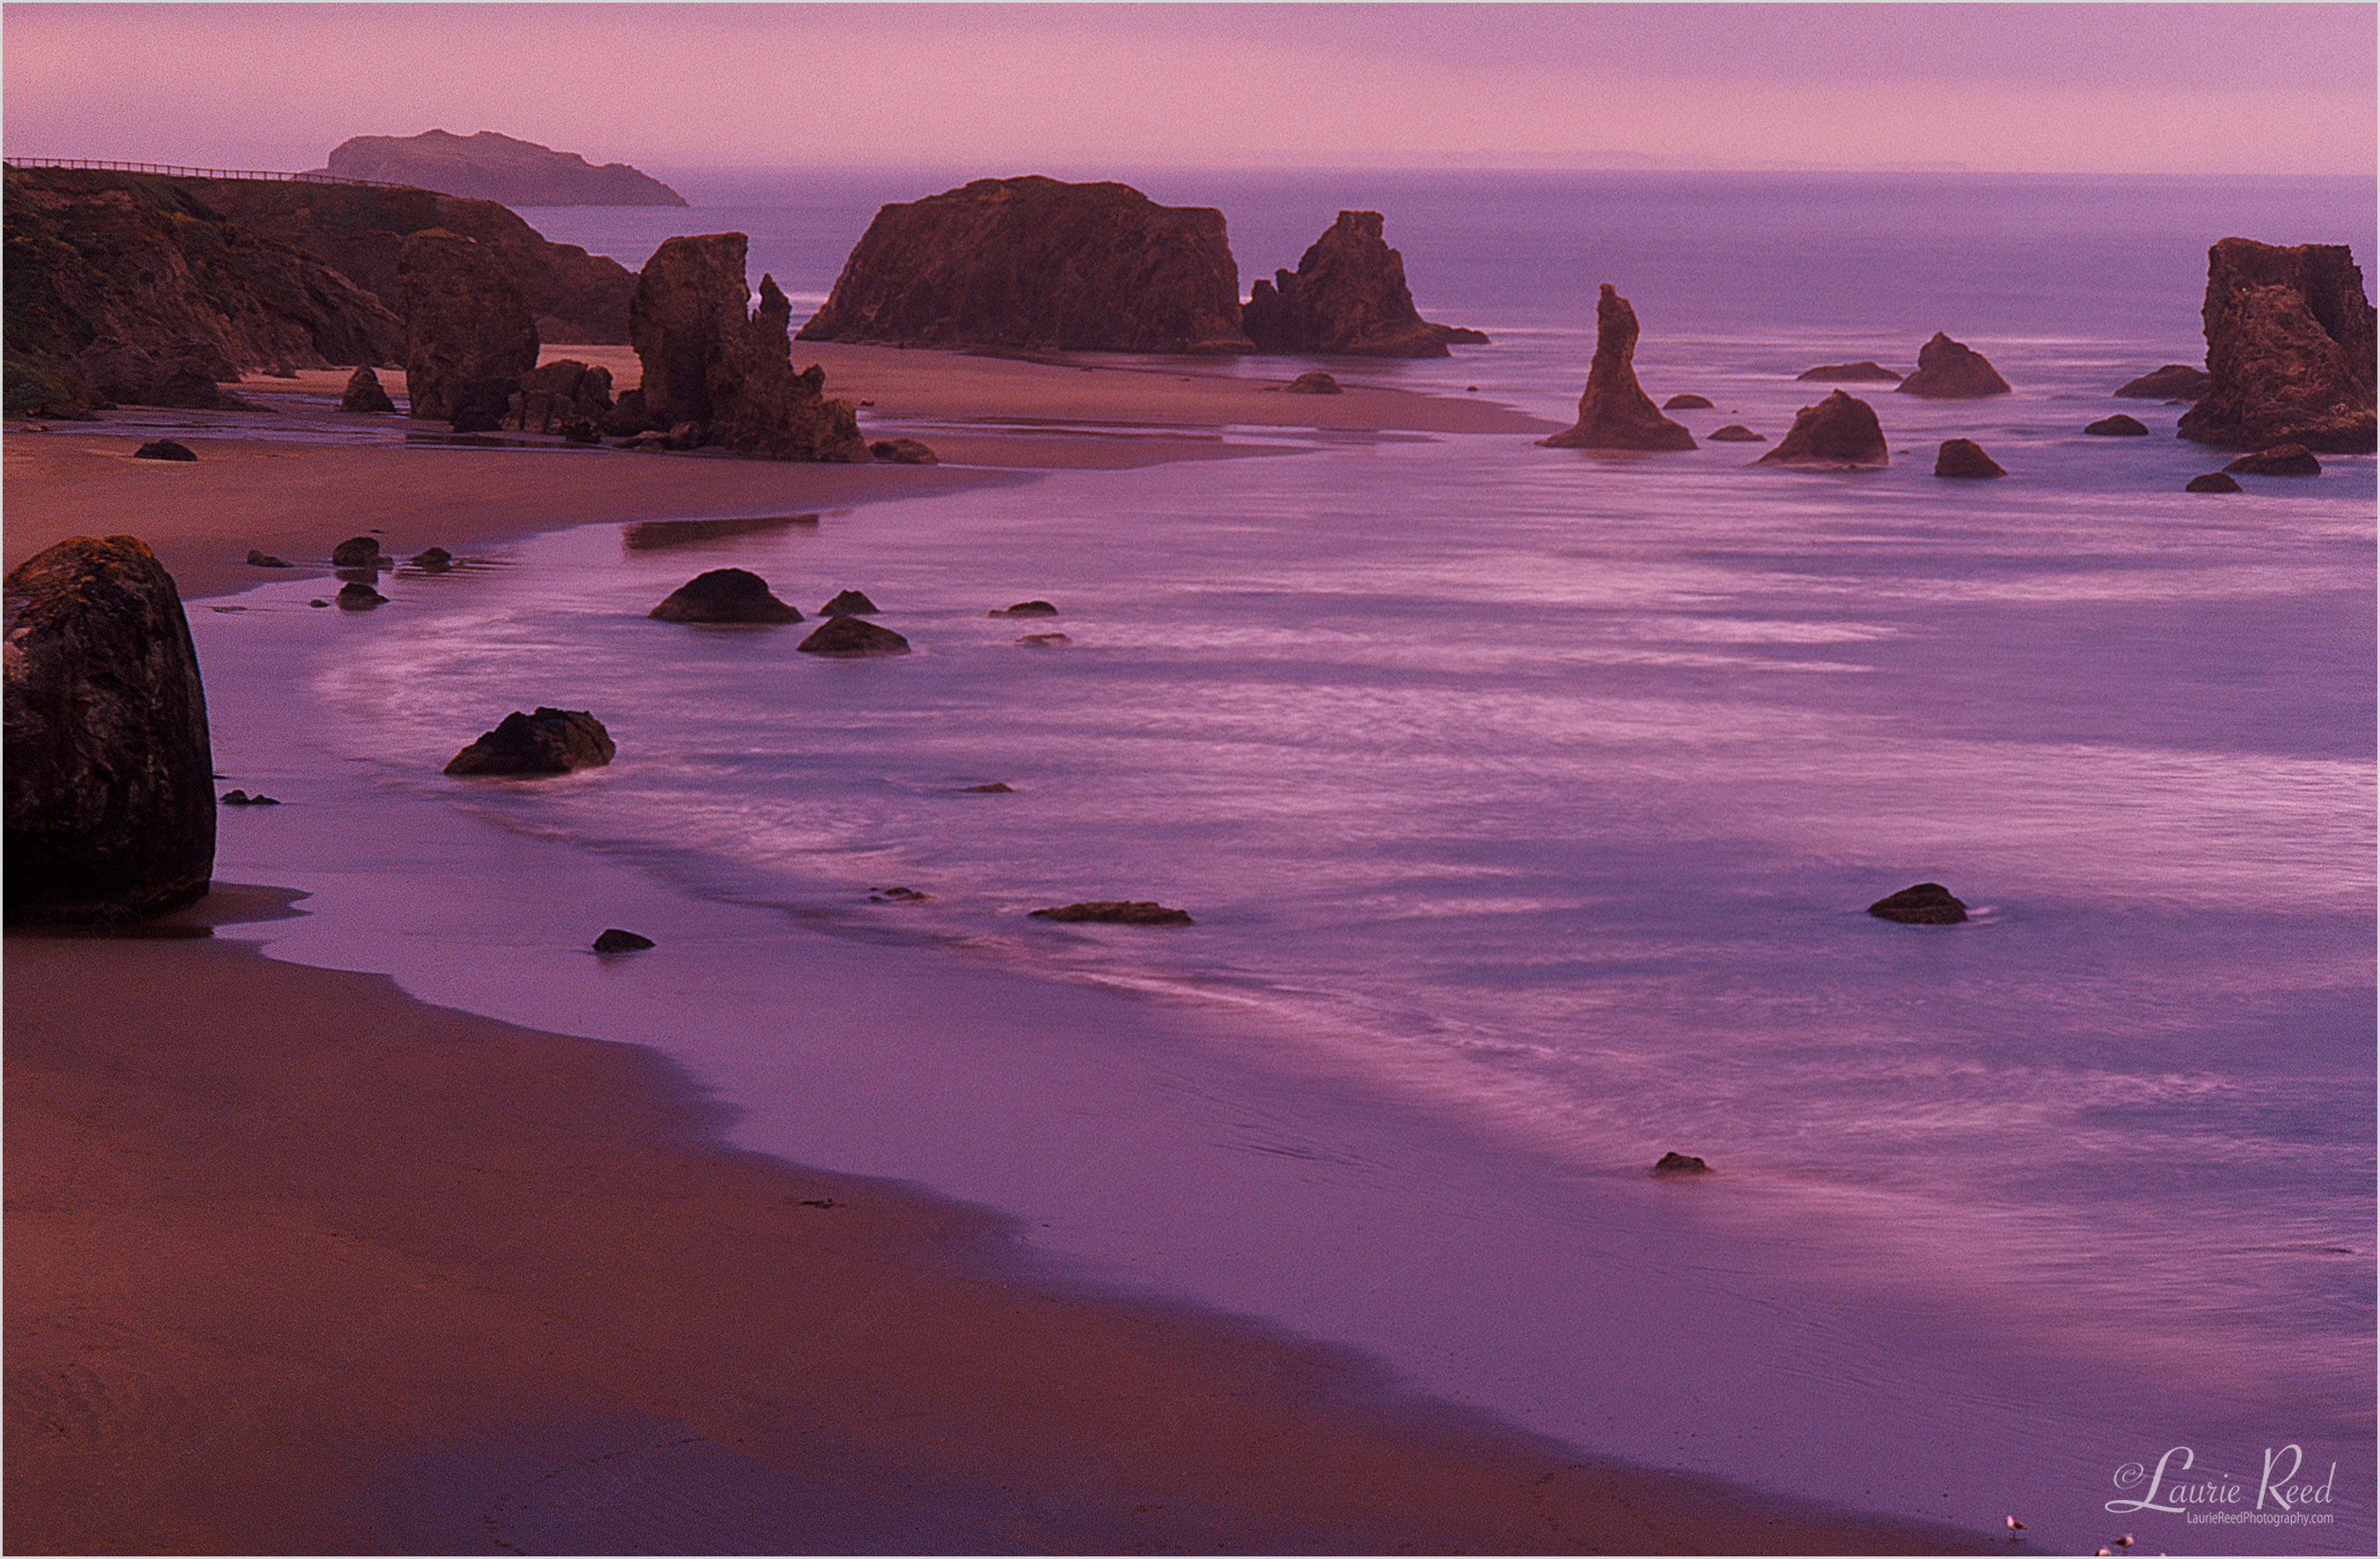 Bandon Beach - © Laurie Reed Photography